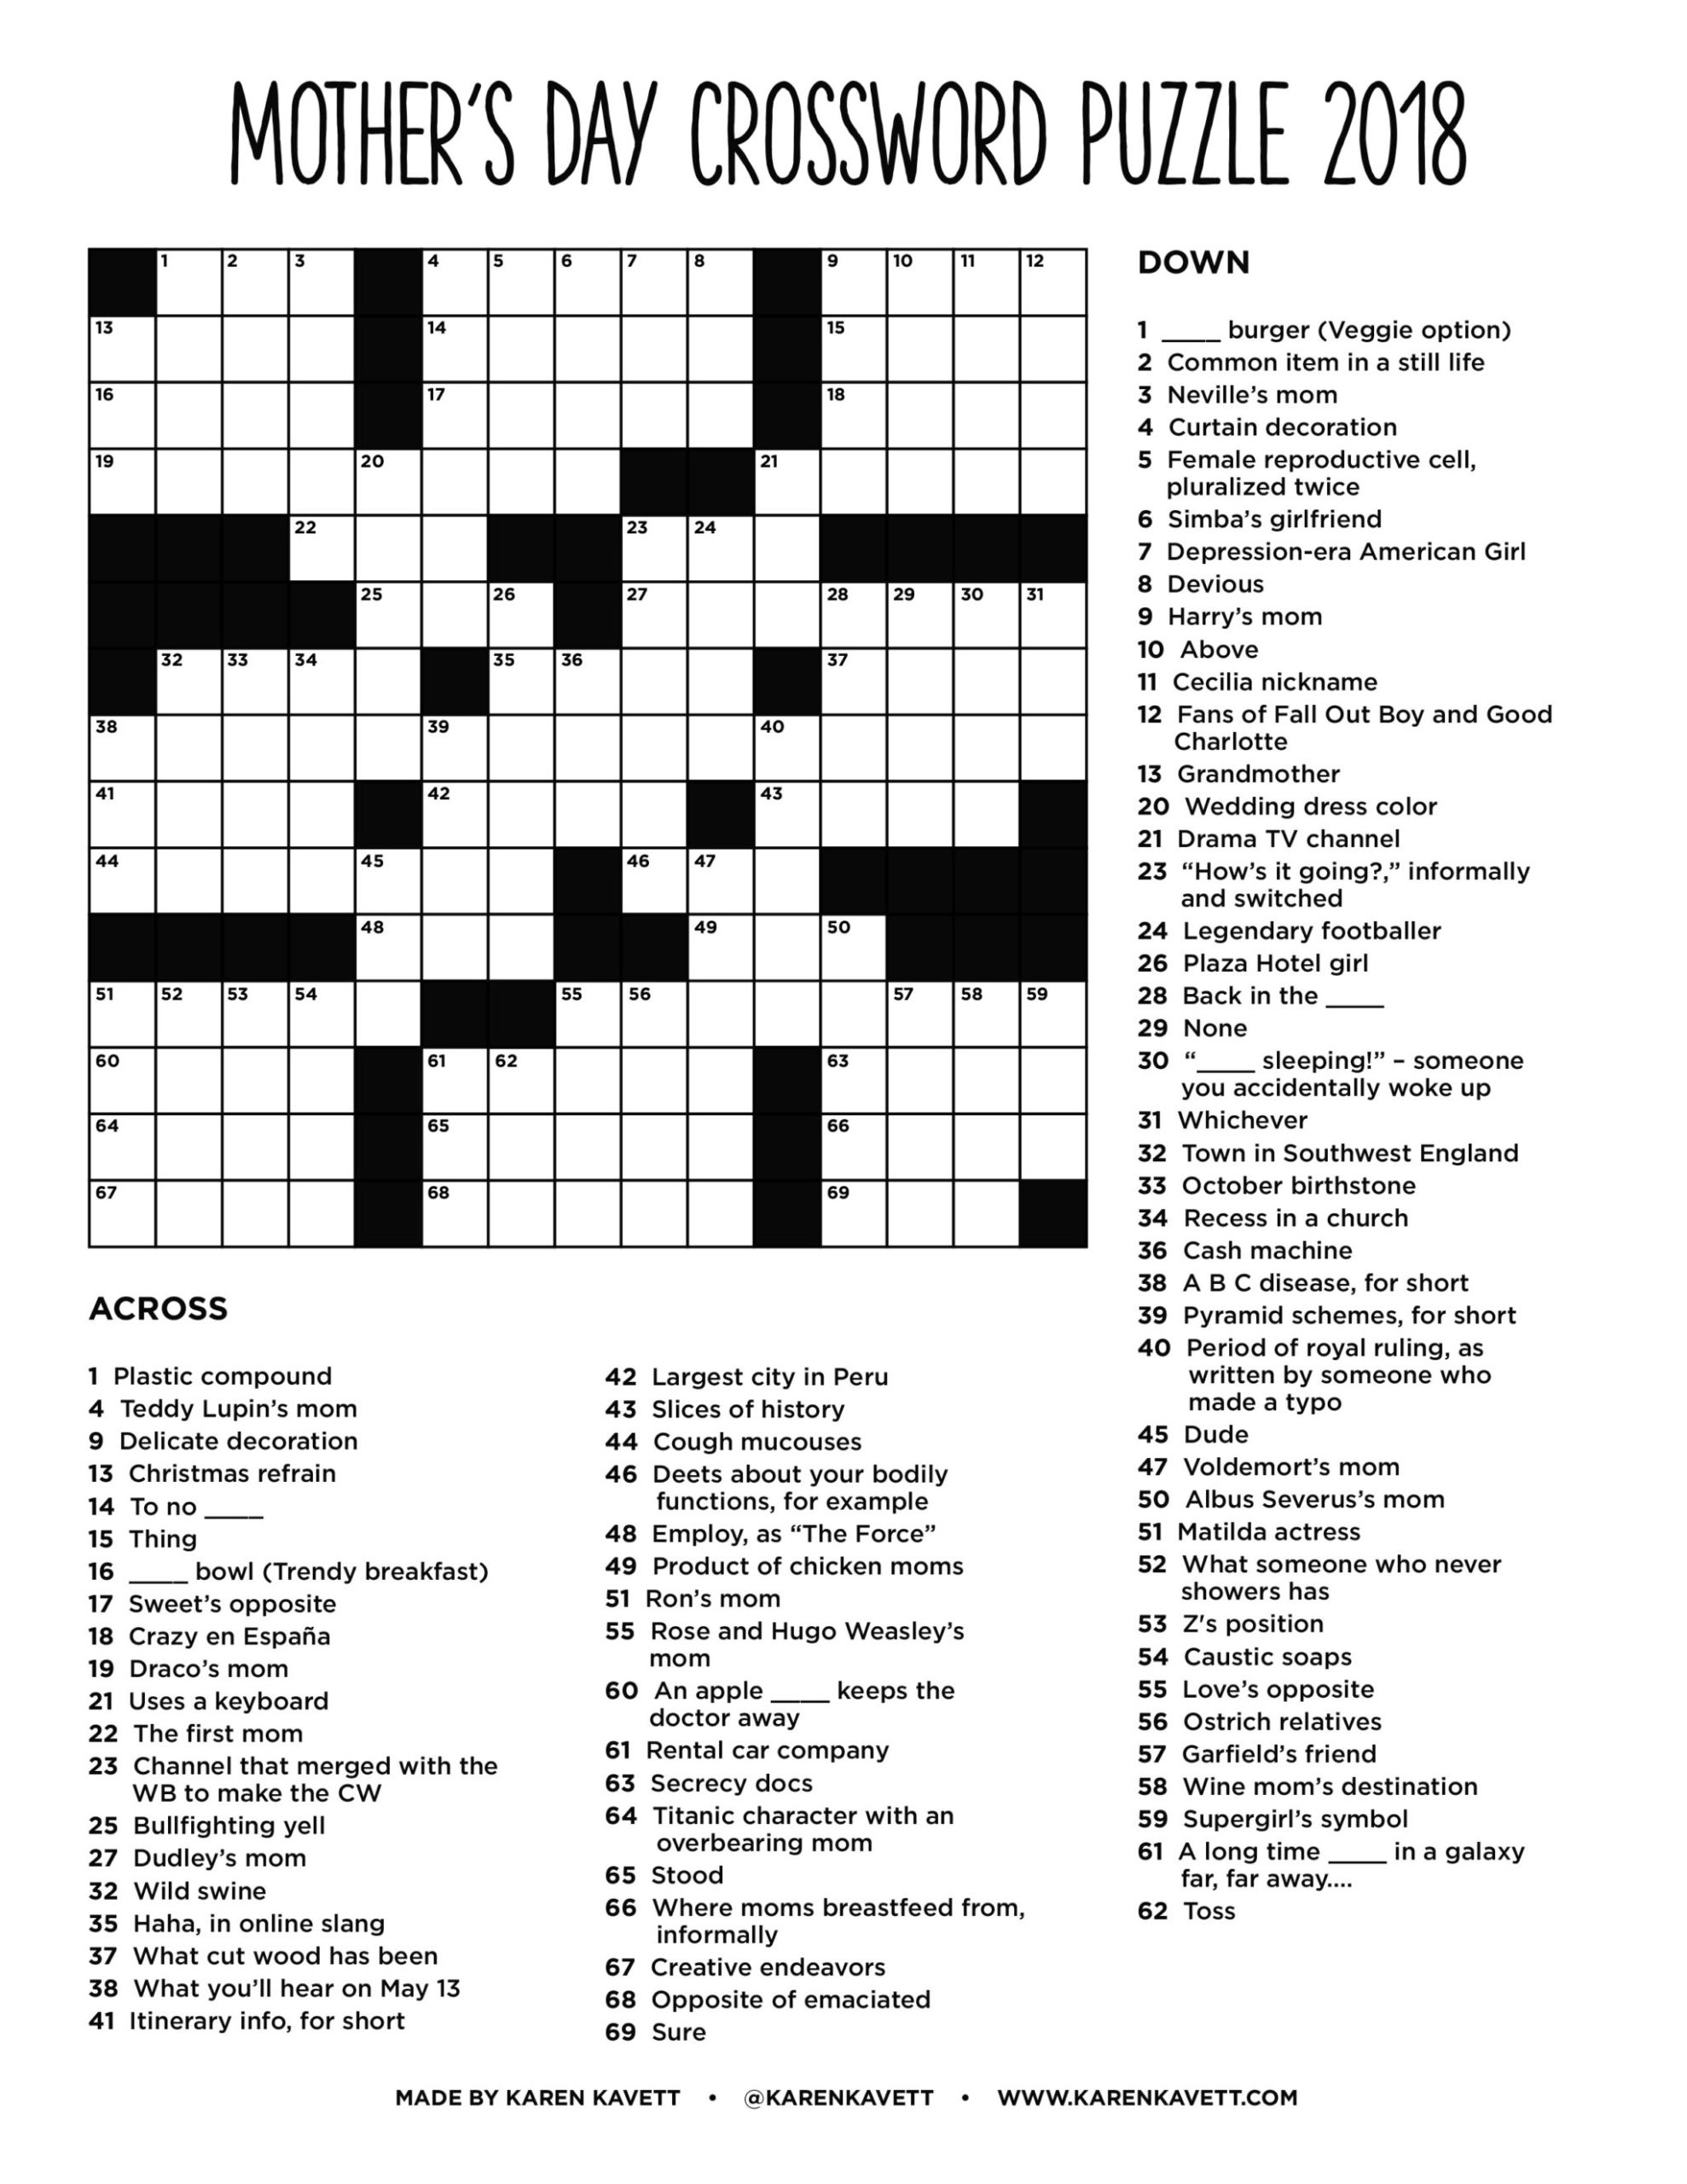 Mother's Day Crossword Puzzles Printable